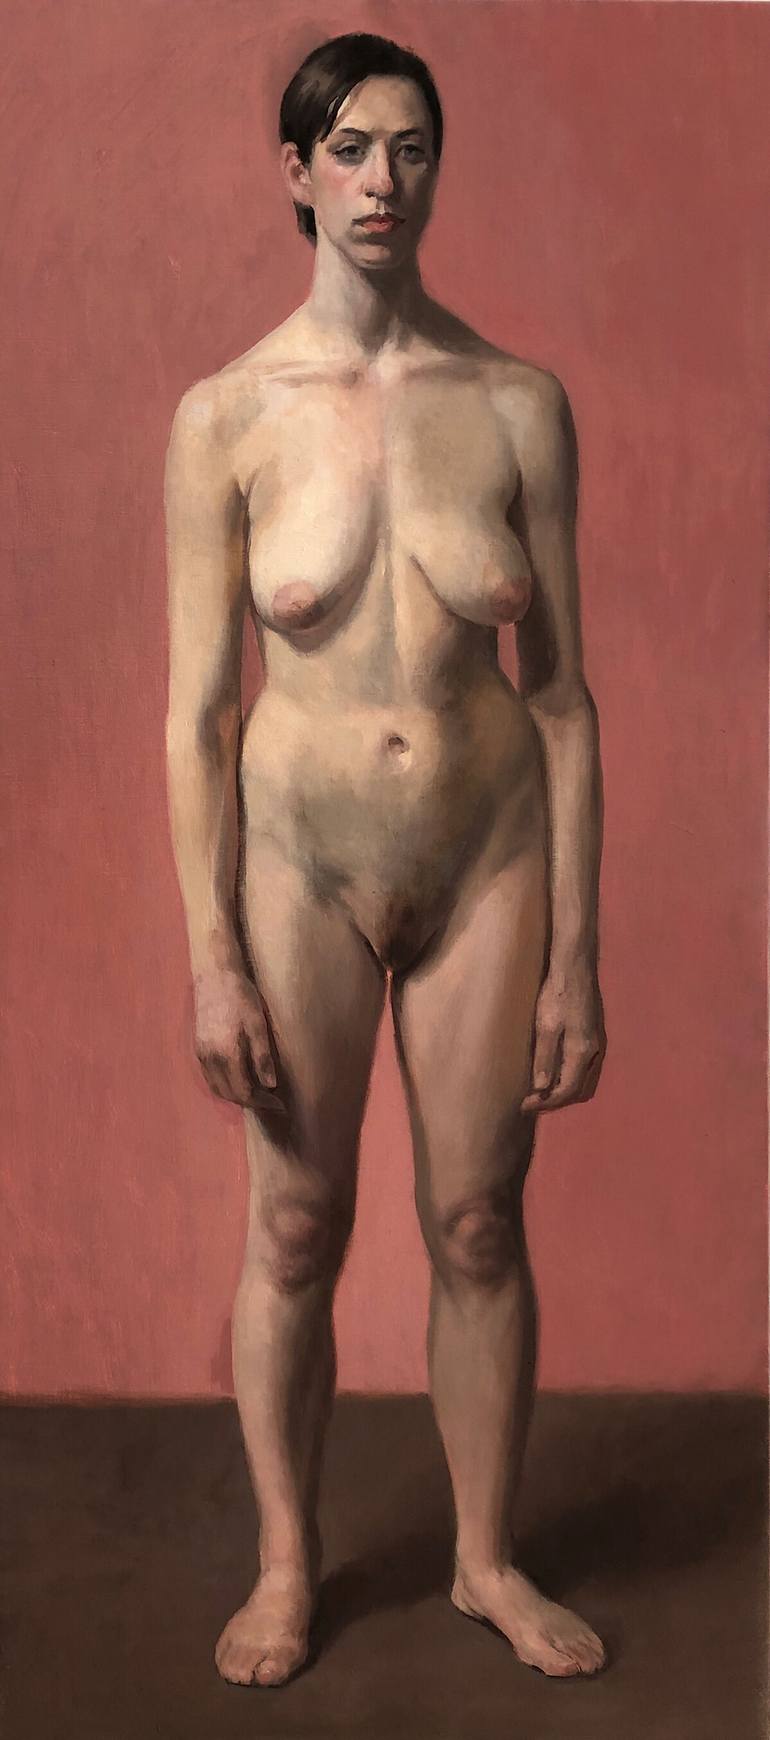 Woman standing nude